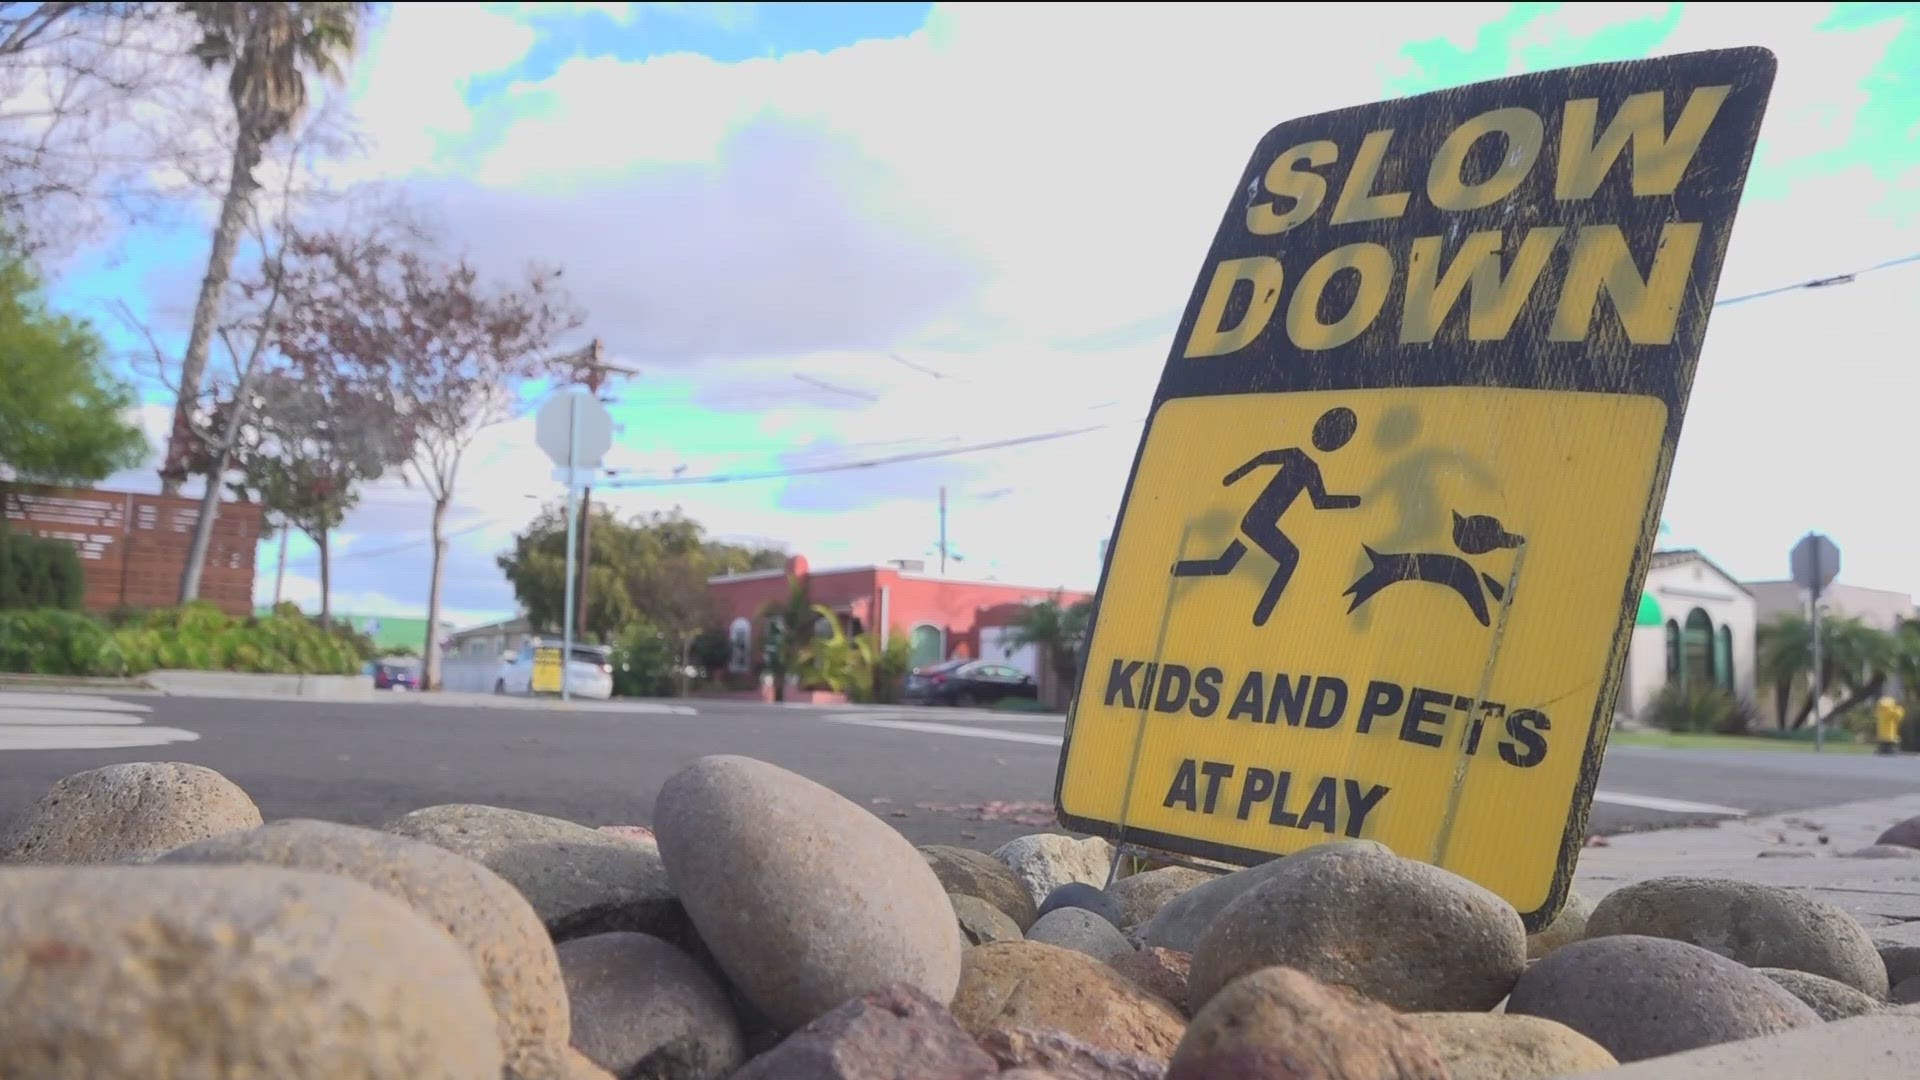 Altadena residents are a step away from having safer streets.